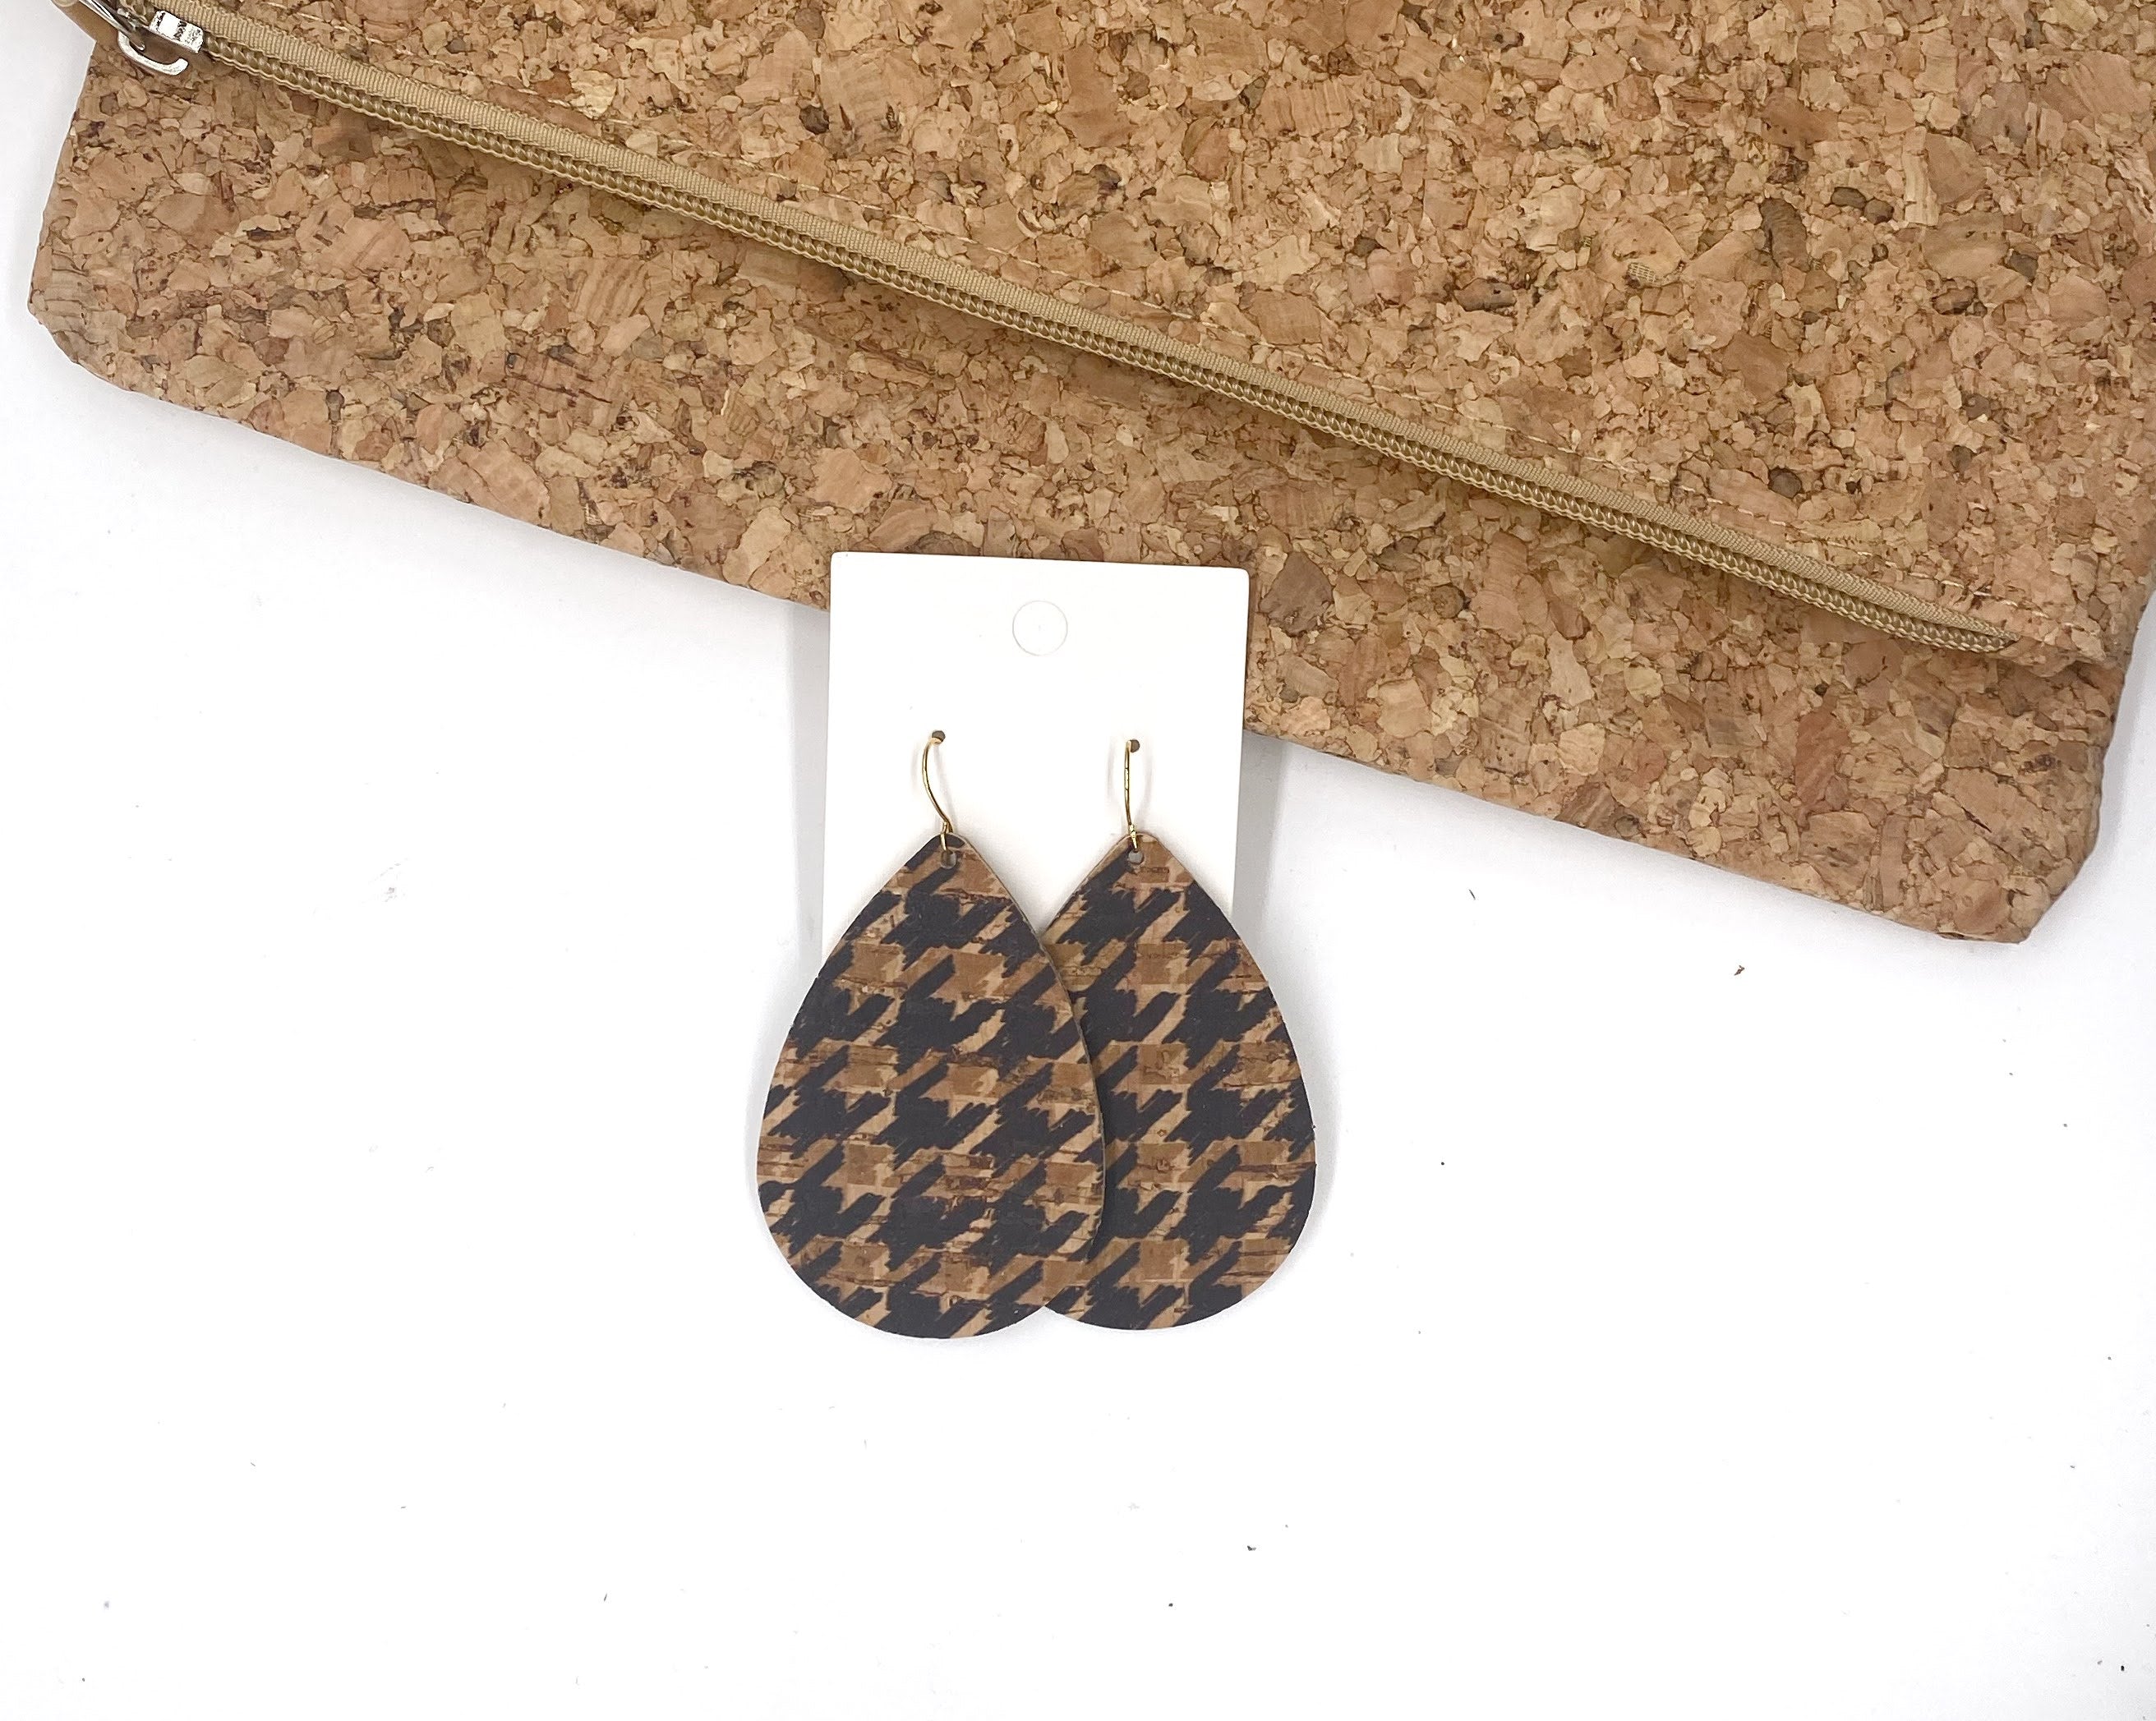 Brown Houndstooth Corkleather Bonded with Leather Teardrop